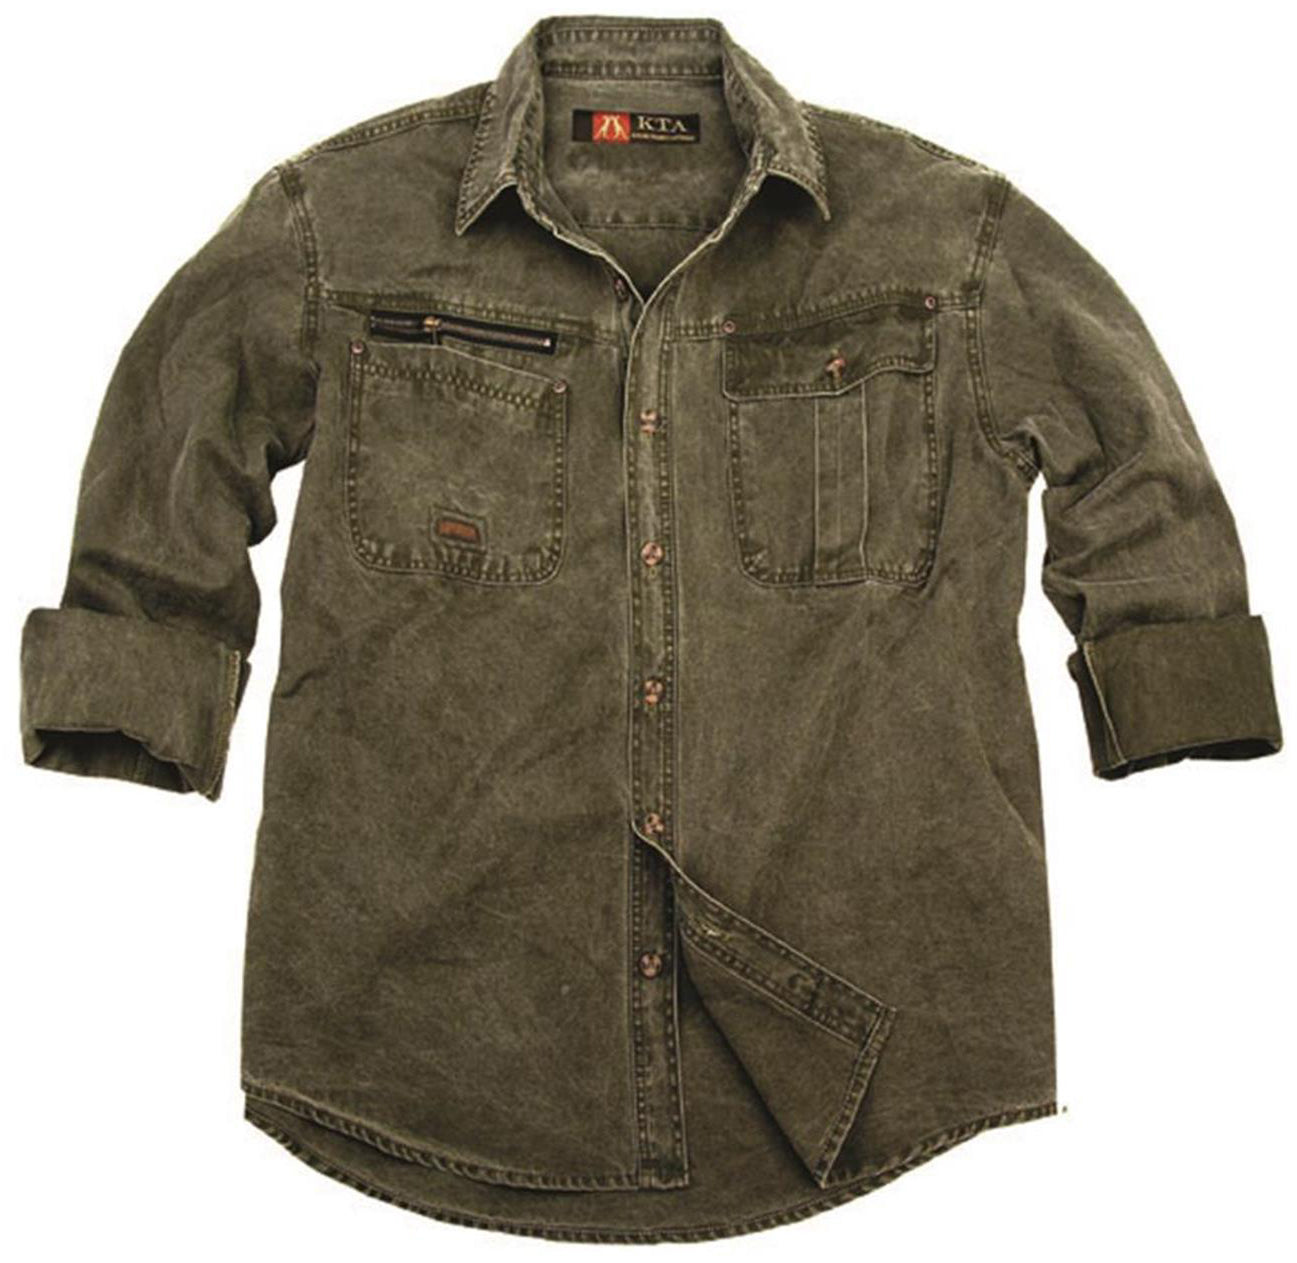 Robusty outdoor men's shirt with collar and extra zipper bag